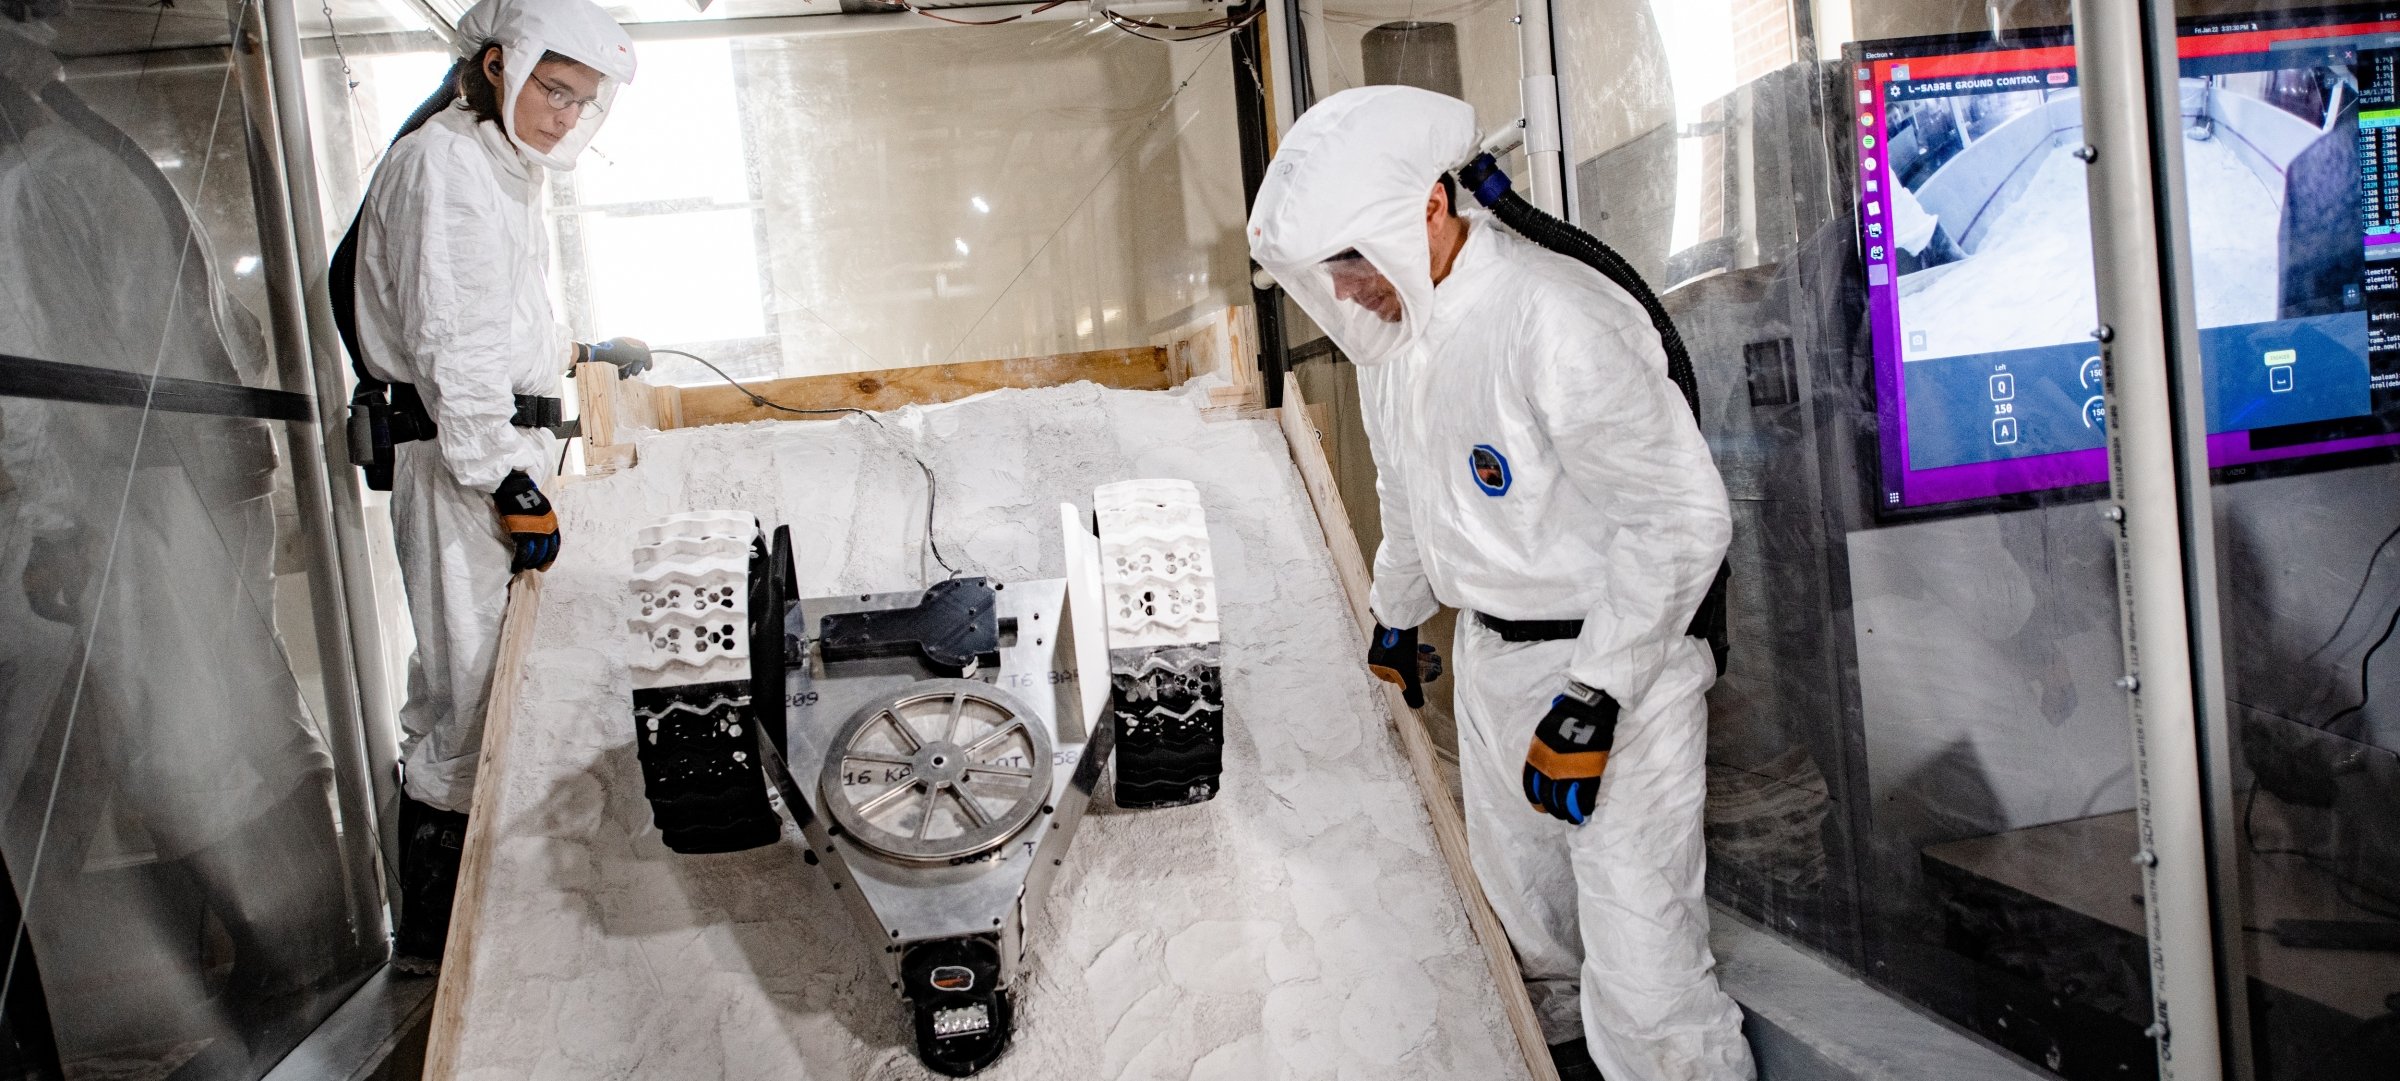 Students testing lunar rover in the dusty vacuum chamber.